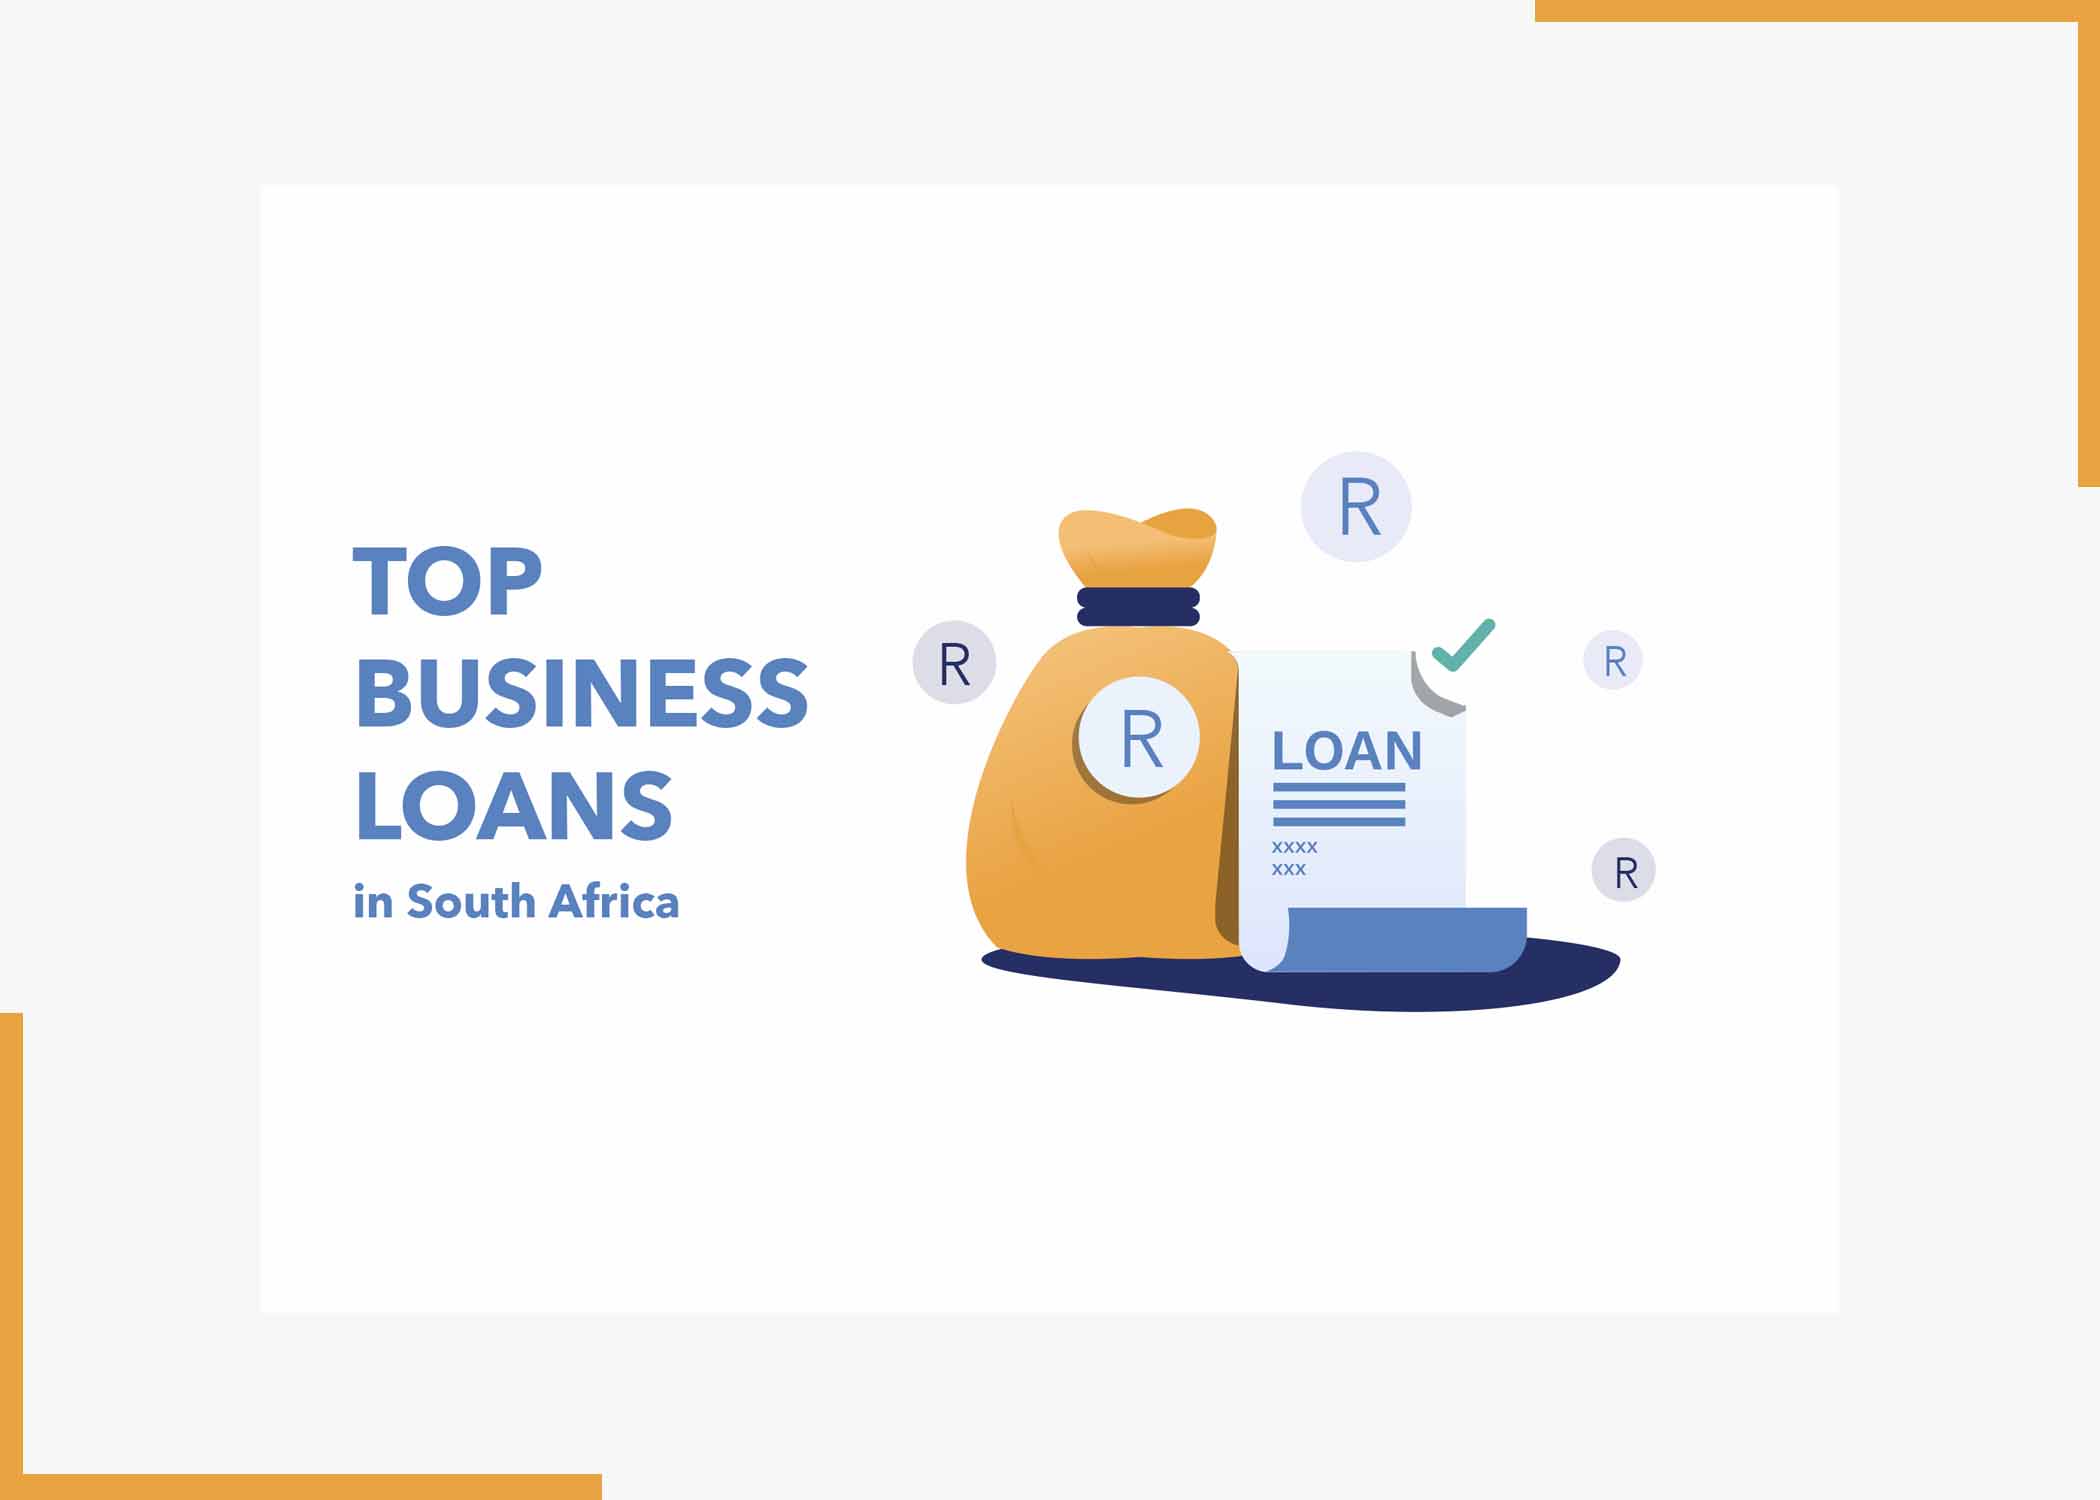 Top Business Loans in South Africa